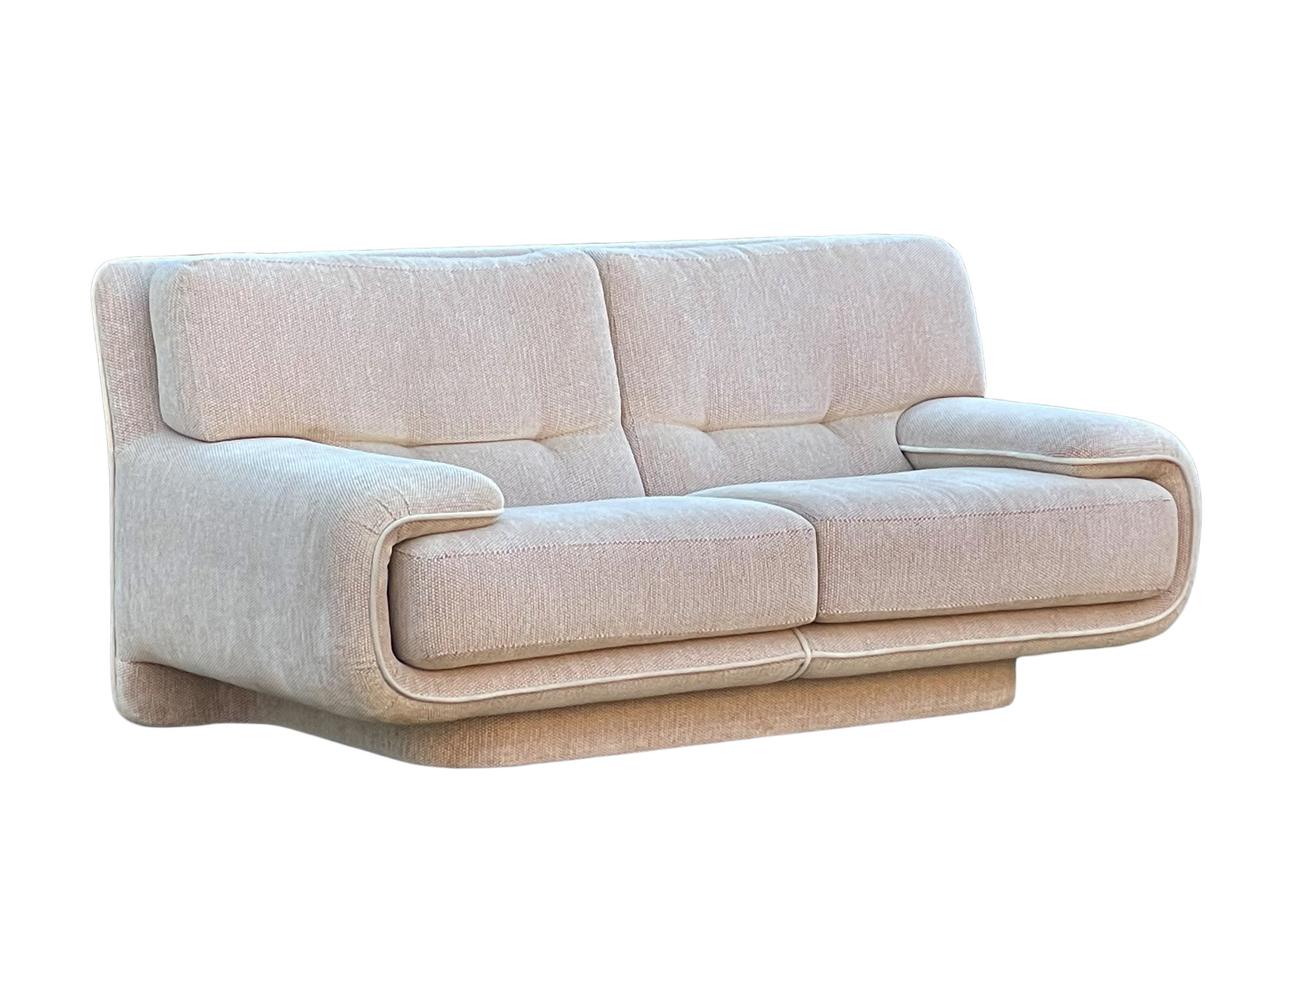 Late 20th Century Mid-Century Post Modern Loveseat or Sofa Produced by Preview Furniture For Sale